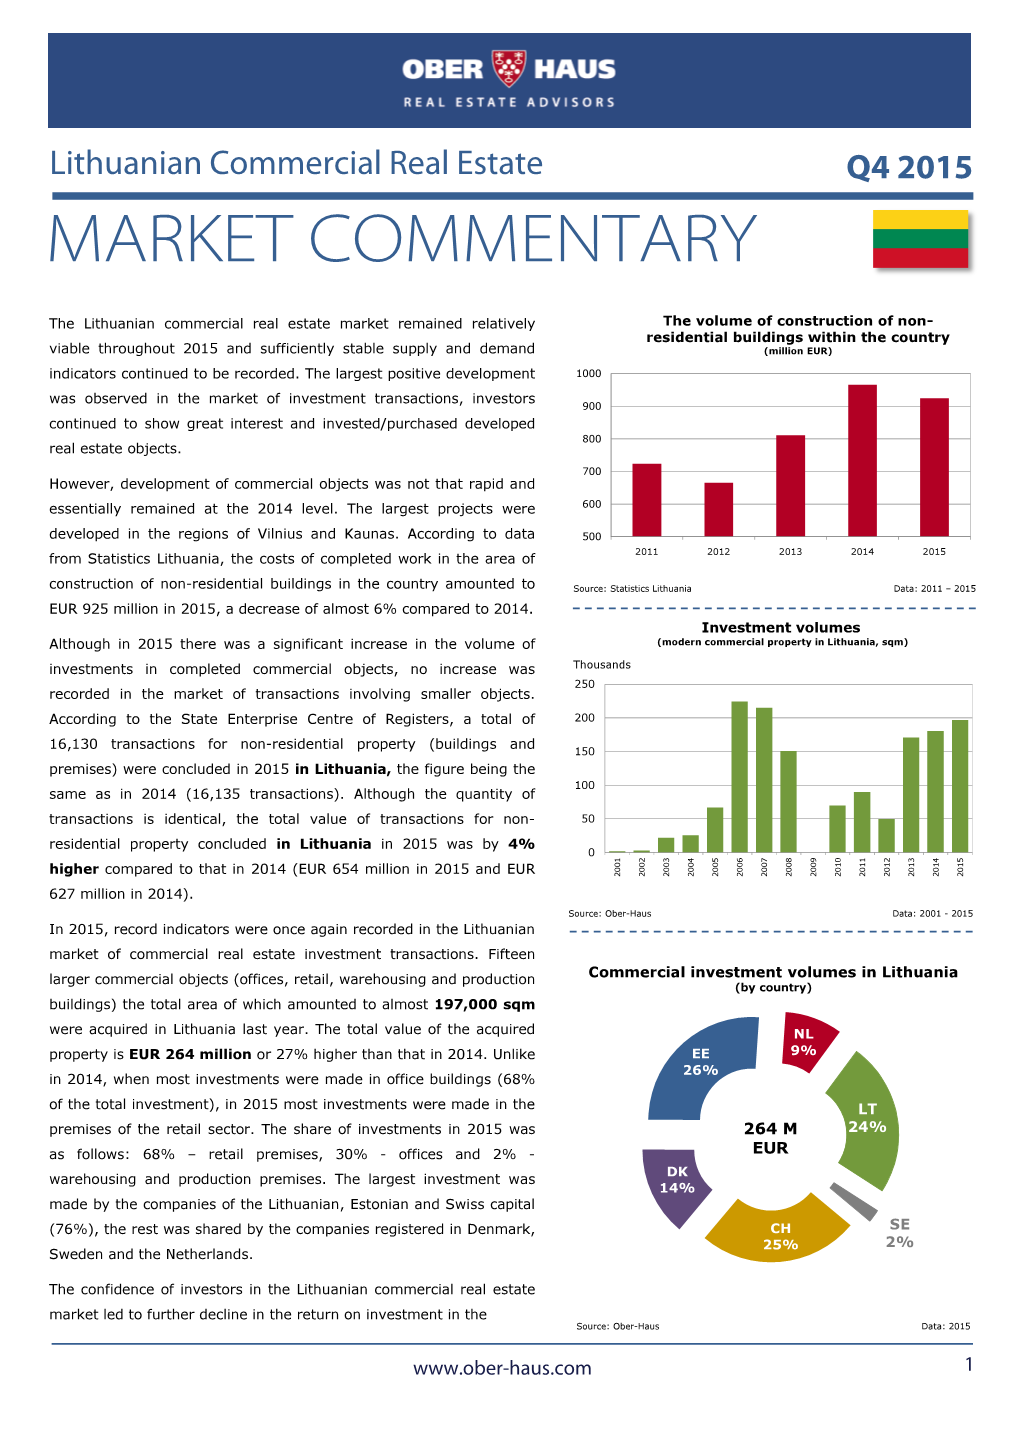 Lithuania Commercial Market Commentary Q4 2015